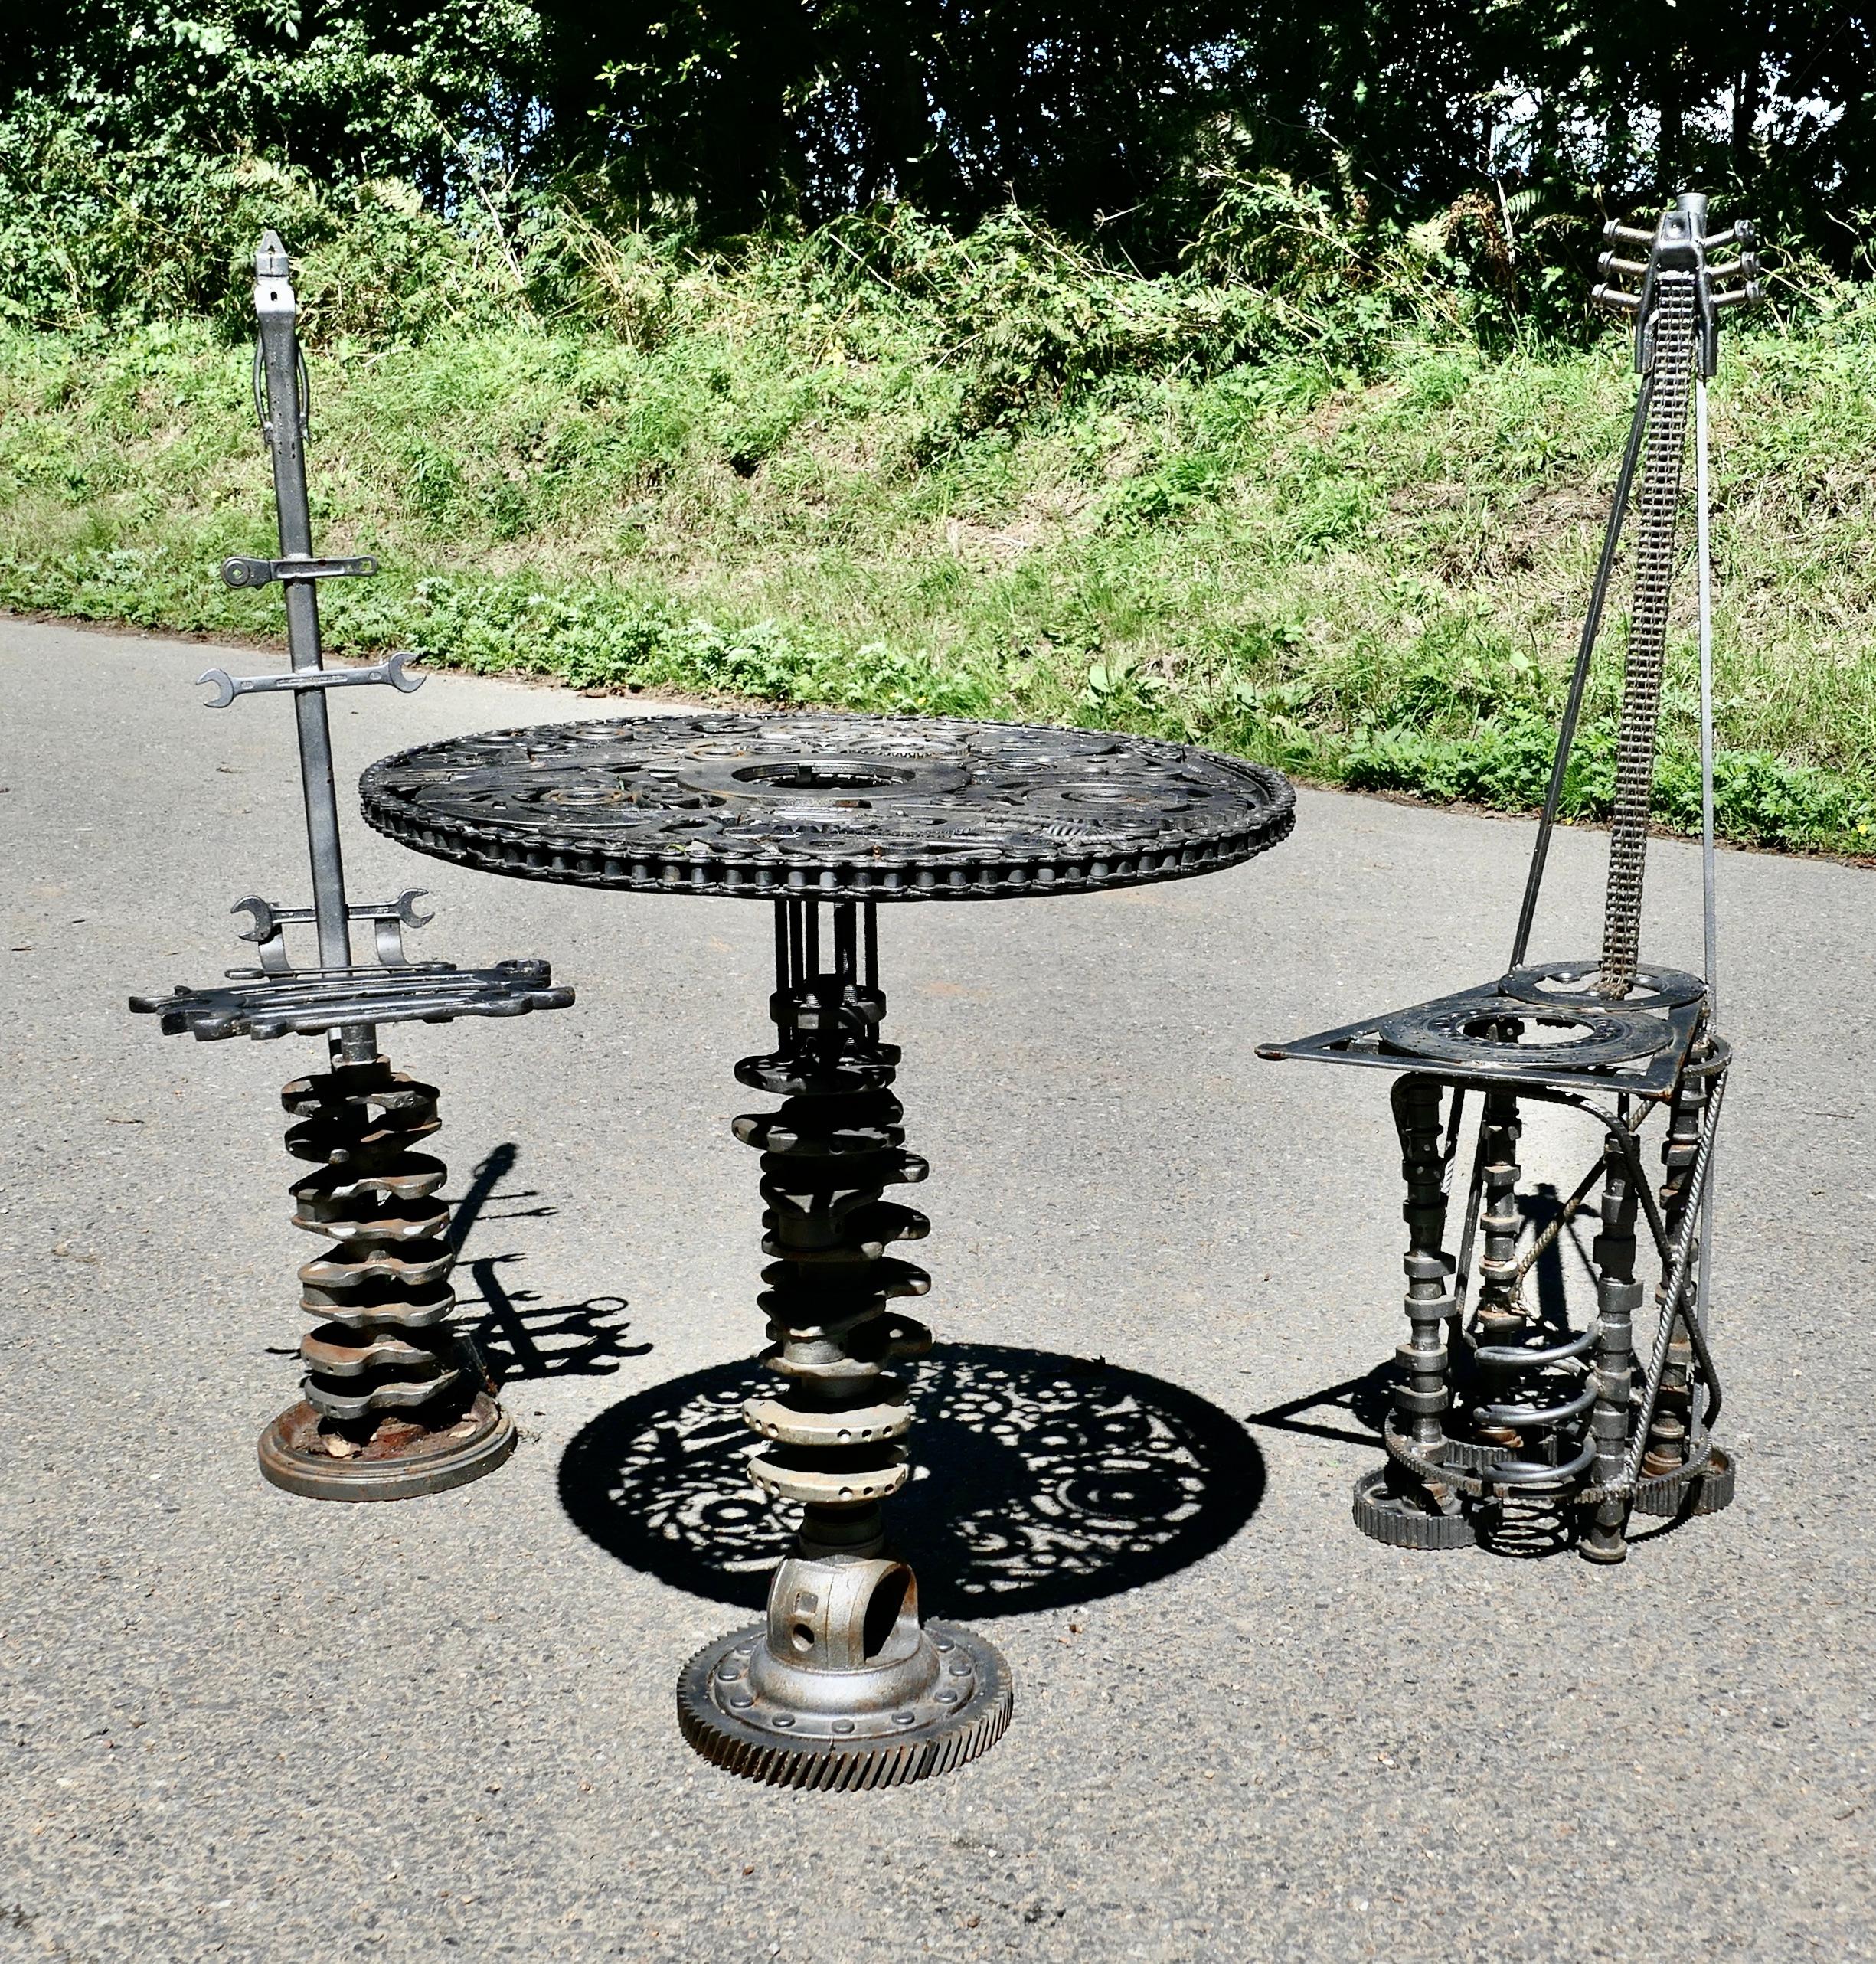 Weird and Quirky Bistro Garden Table and Chairs  

Weird and Quirky Bistro Garden Table and Chairs made from Iron Tools and Car parts
This is no doubt a “Work of Art” with a mechanical theme, the table and chairs are made from every imaginable